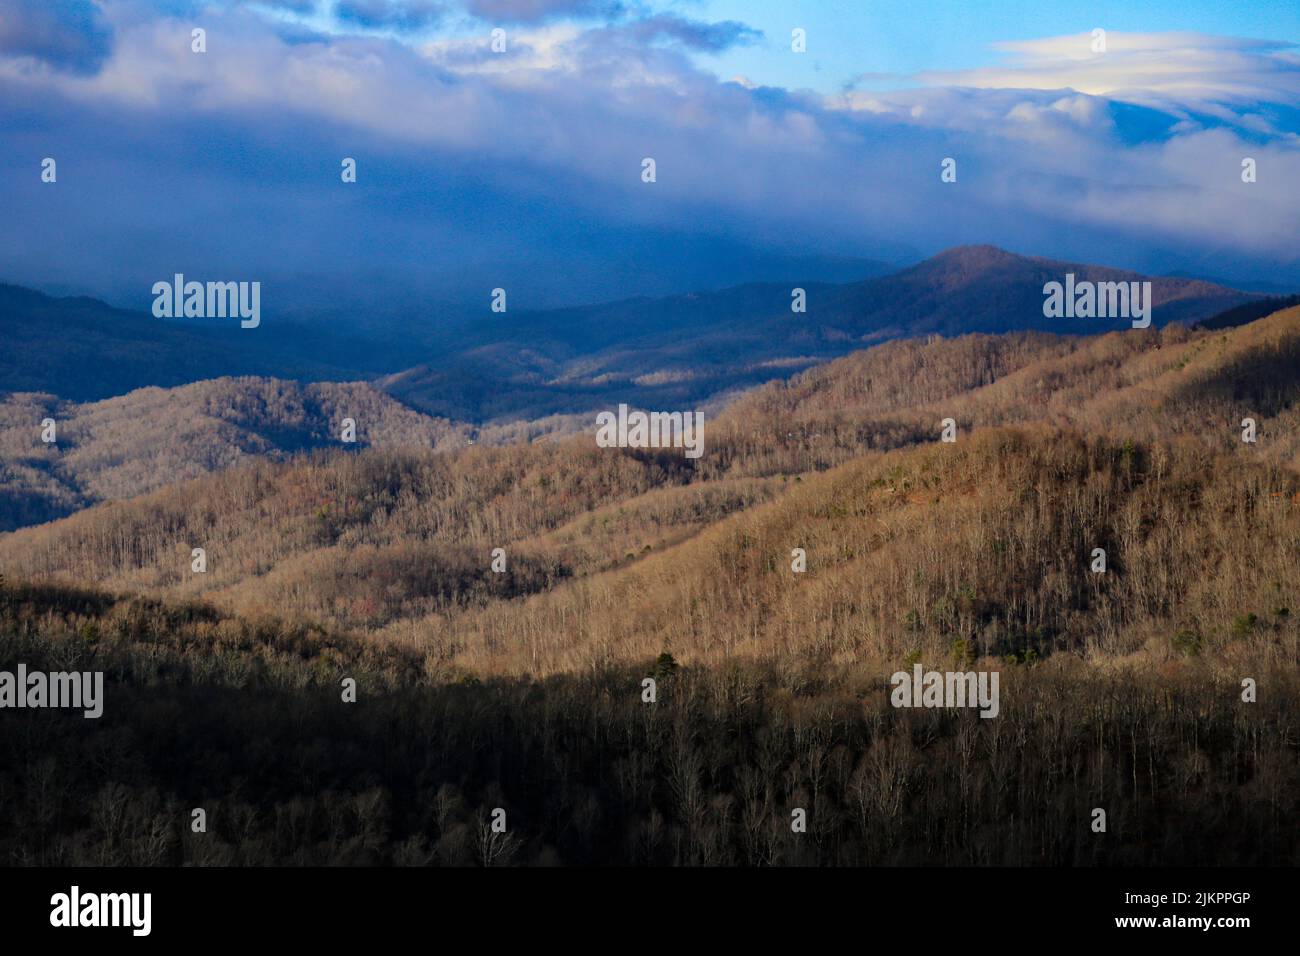 The beautiful view of the hills against the blue sky. Stock Photo